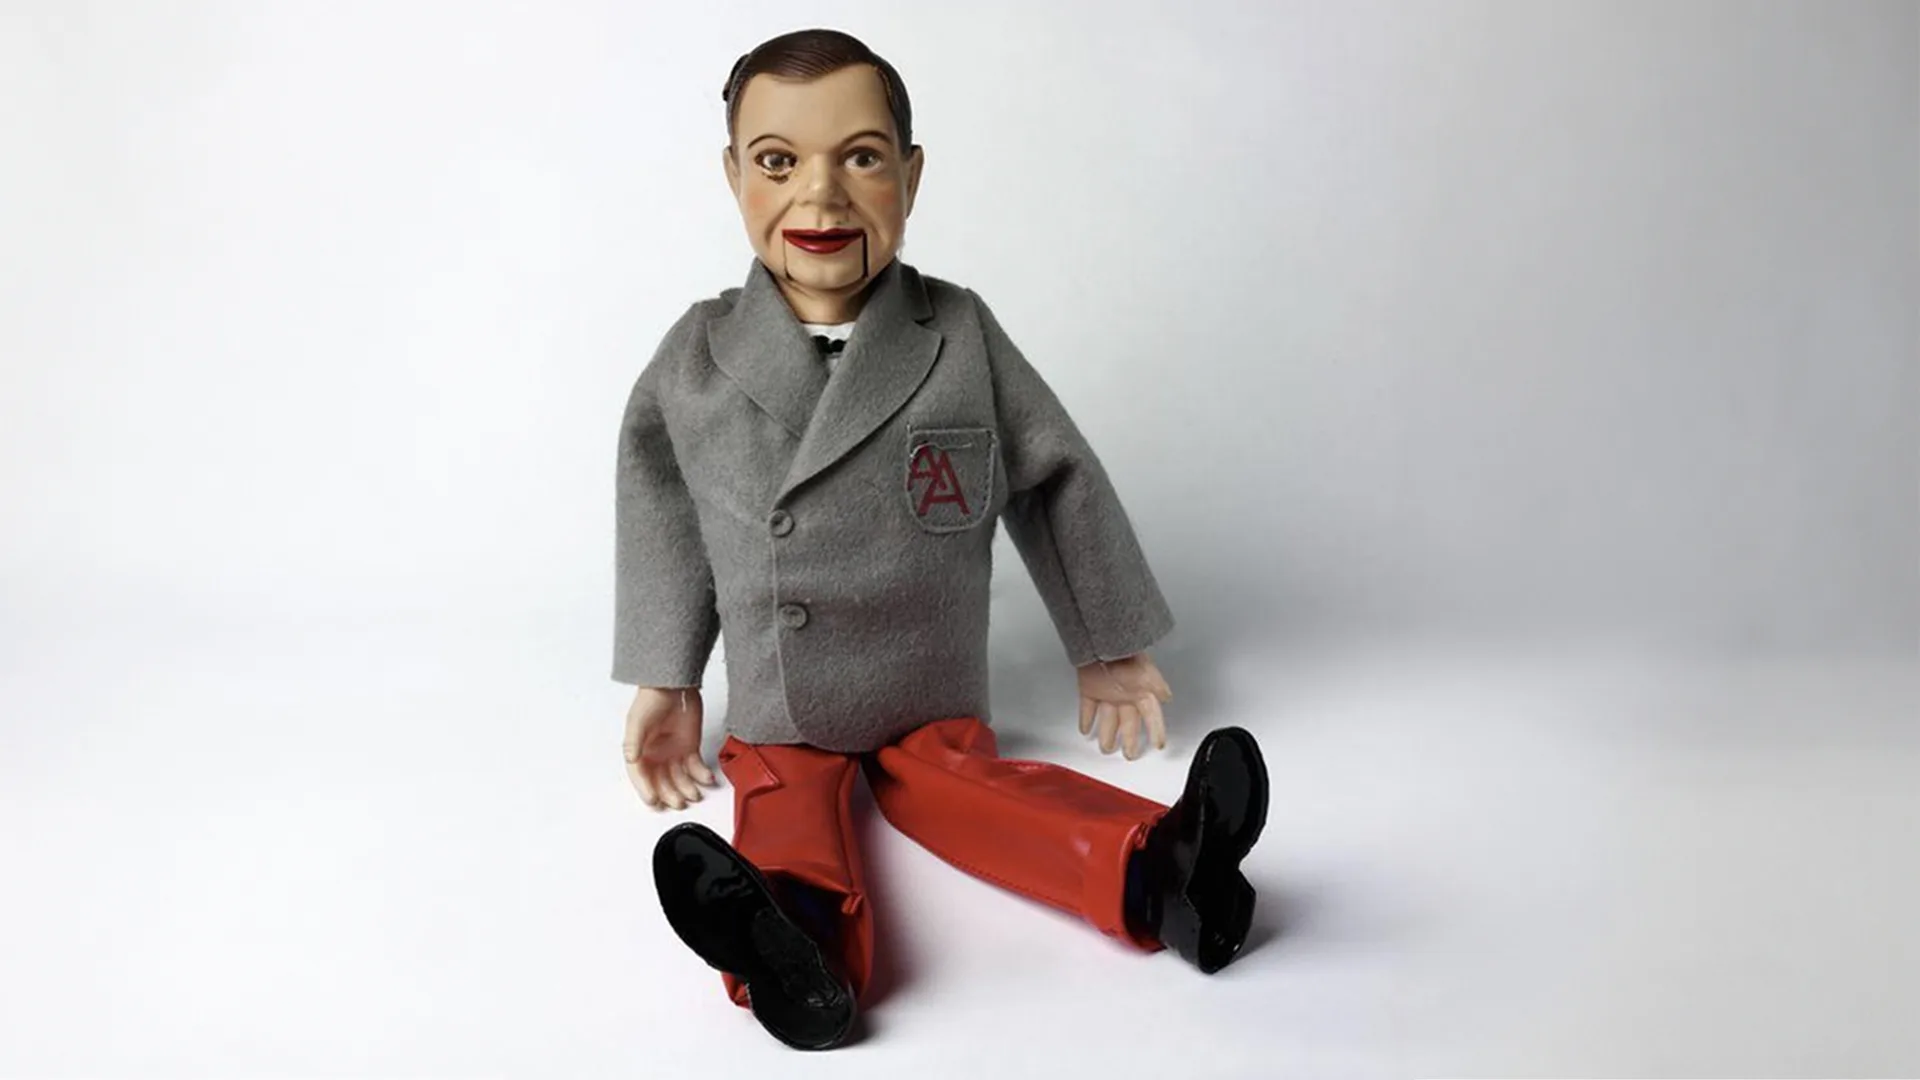 Archie Andrews, a doll wearing a grey and red suit